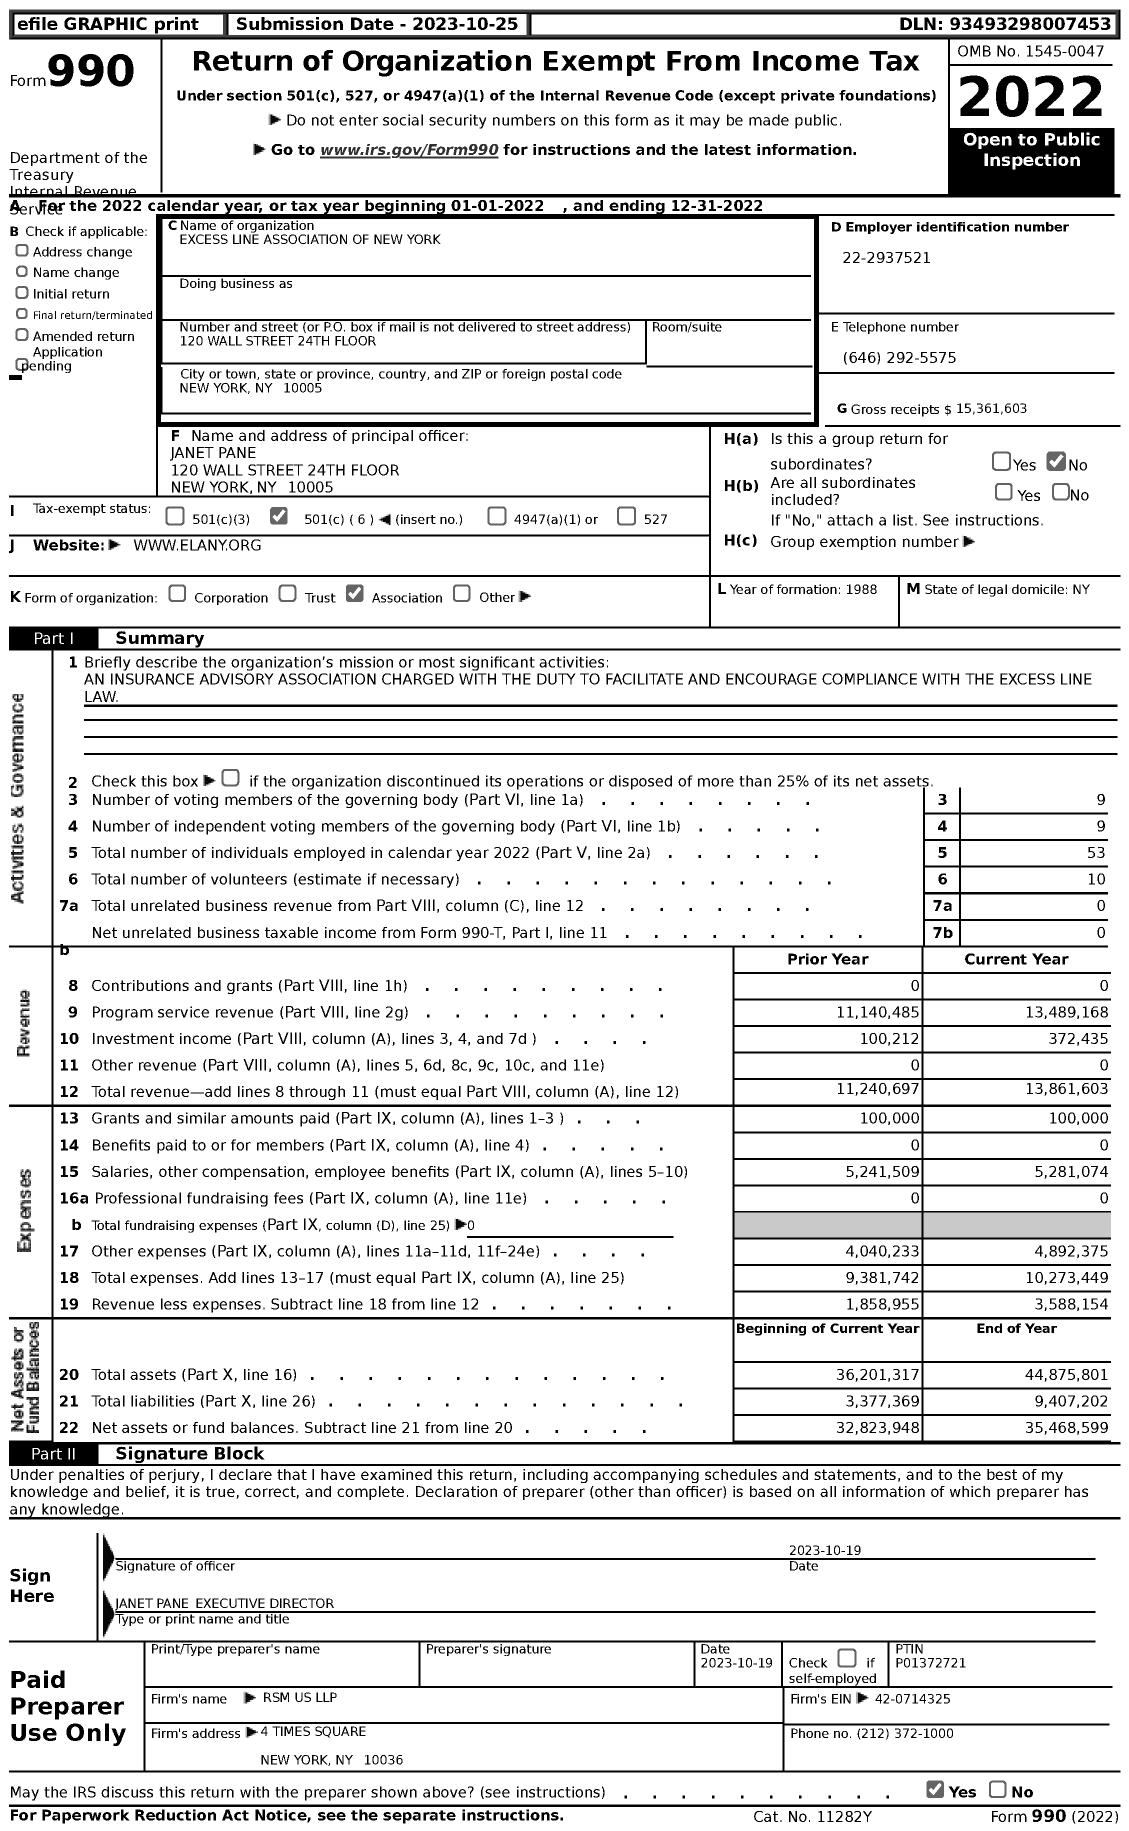 Image of first page of 2022 Form 990 for Excess Line Association of New York